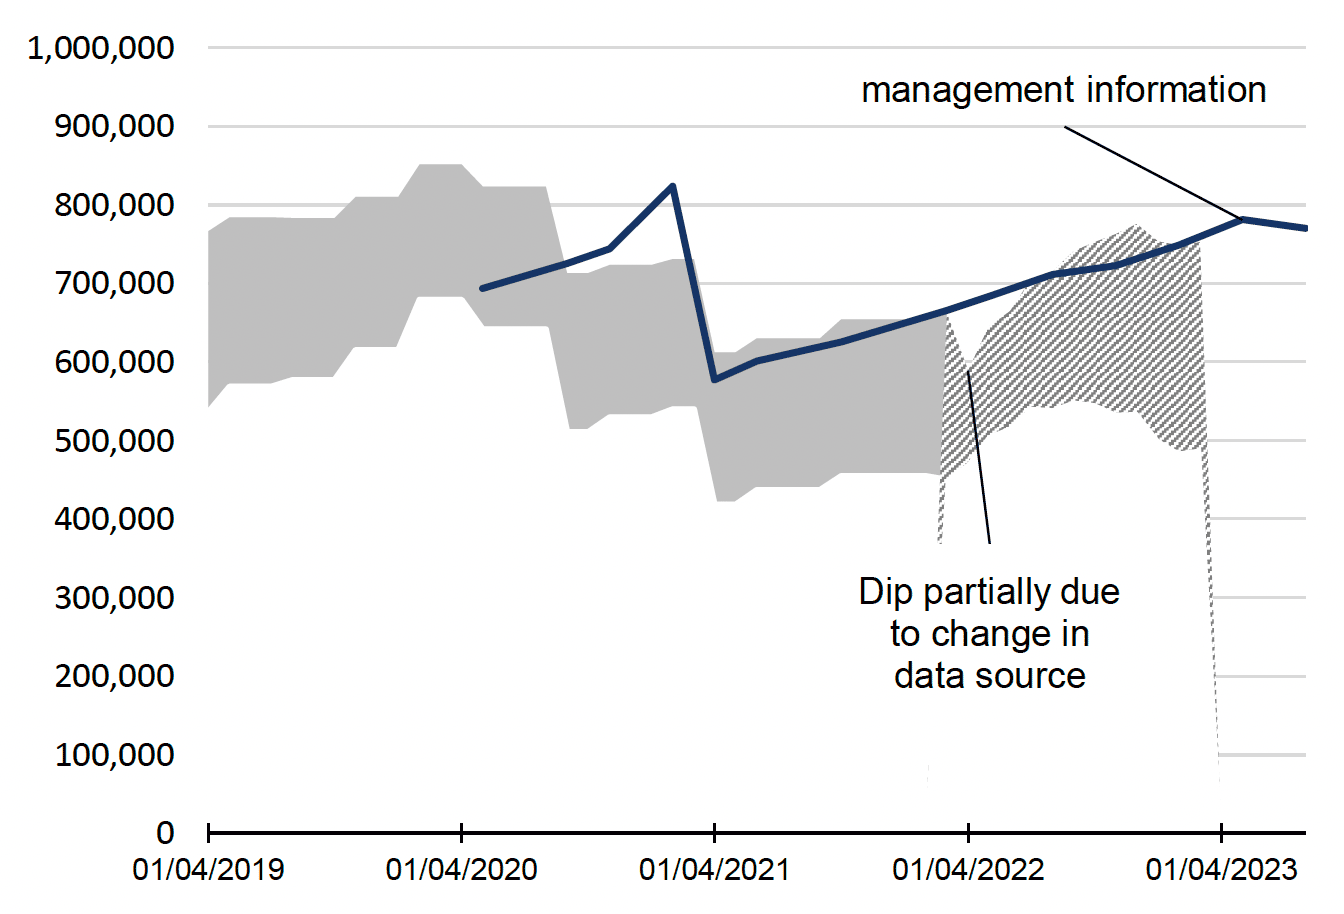 Graph of final model There is a band of grey marked with the upper and lower limits from the date 1 April to 2019 to 31 March 2023 of representing the model. There is a blue line from May 2022 to August 2023 representing the management information data. The management information it outside the model for year of pandemic and then is near the upper limit from April 2021 onwards. 